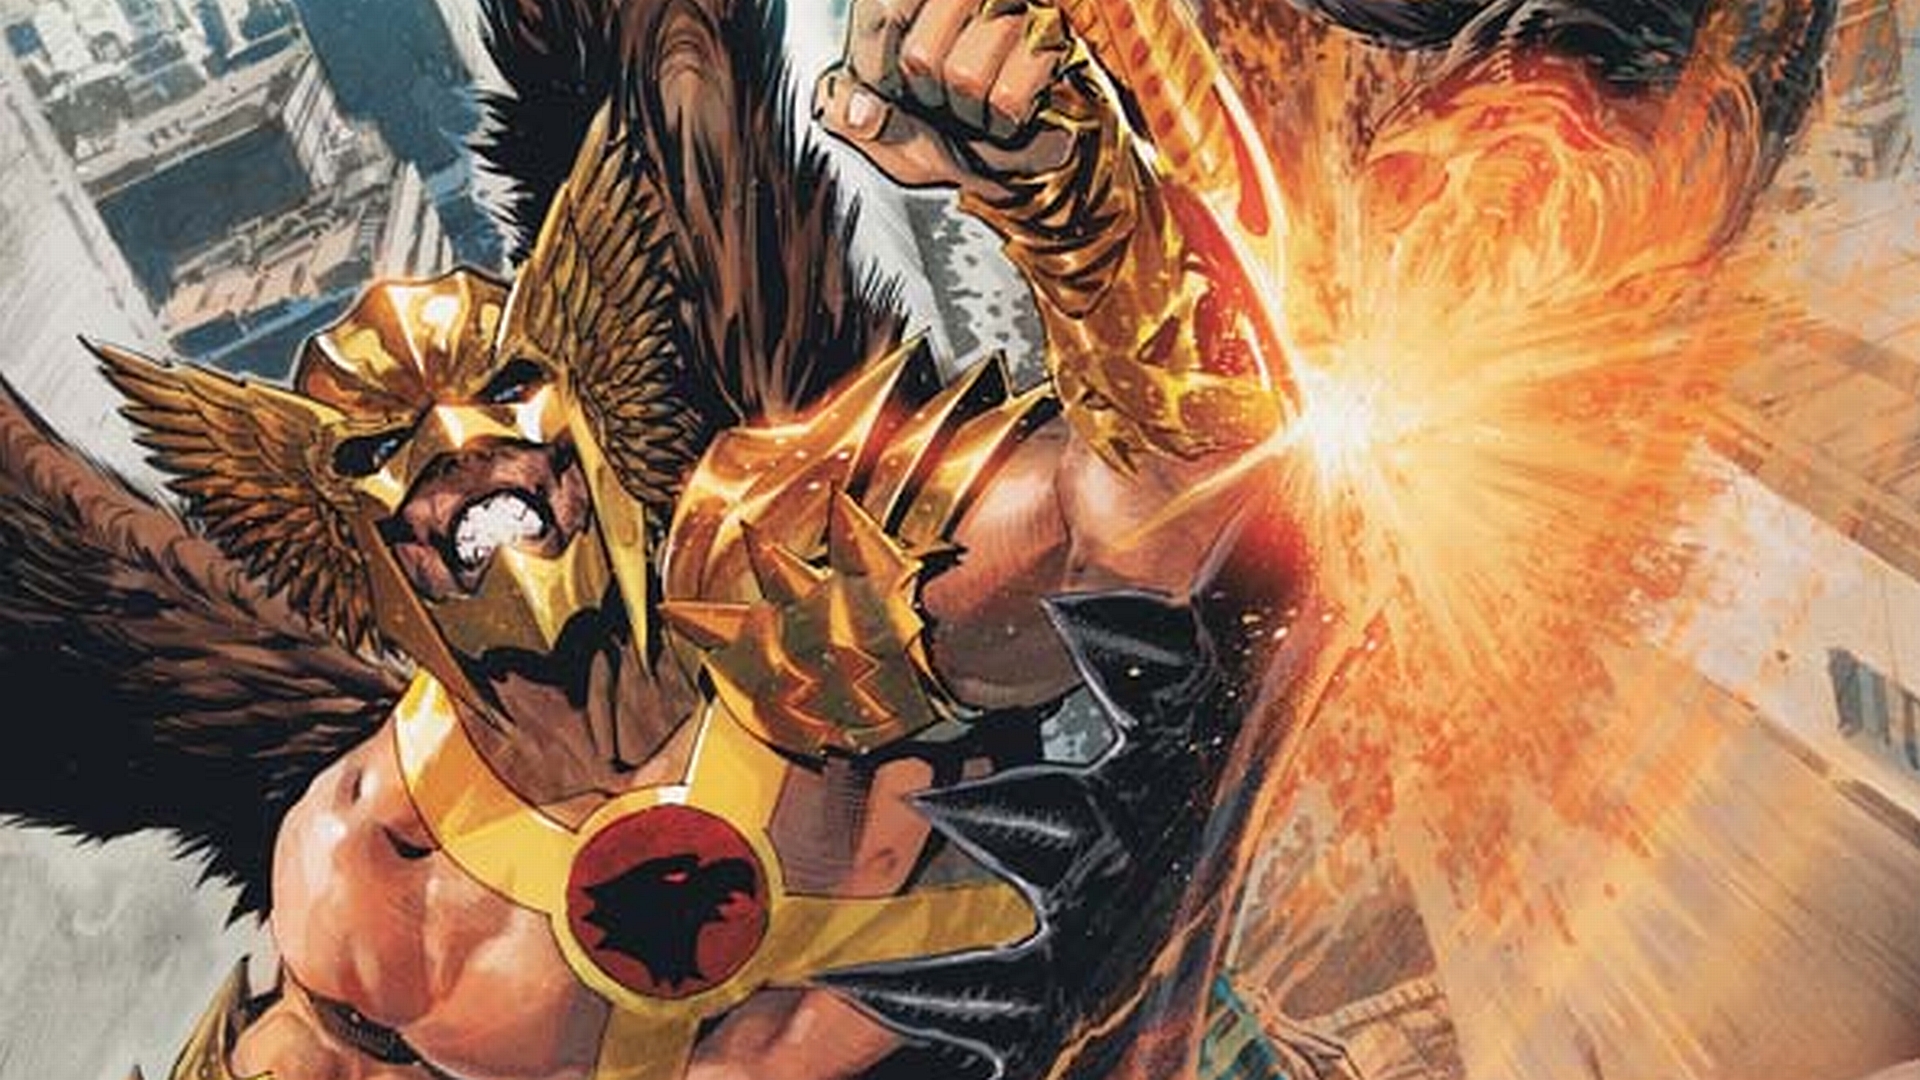 comics, hawkman, dc comics, hawkman (dc comics), katar hol, the new 52